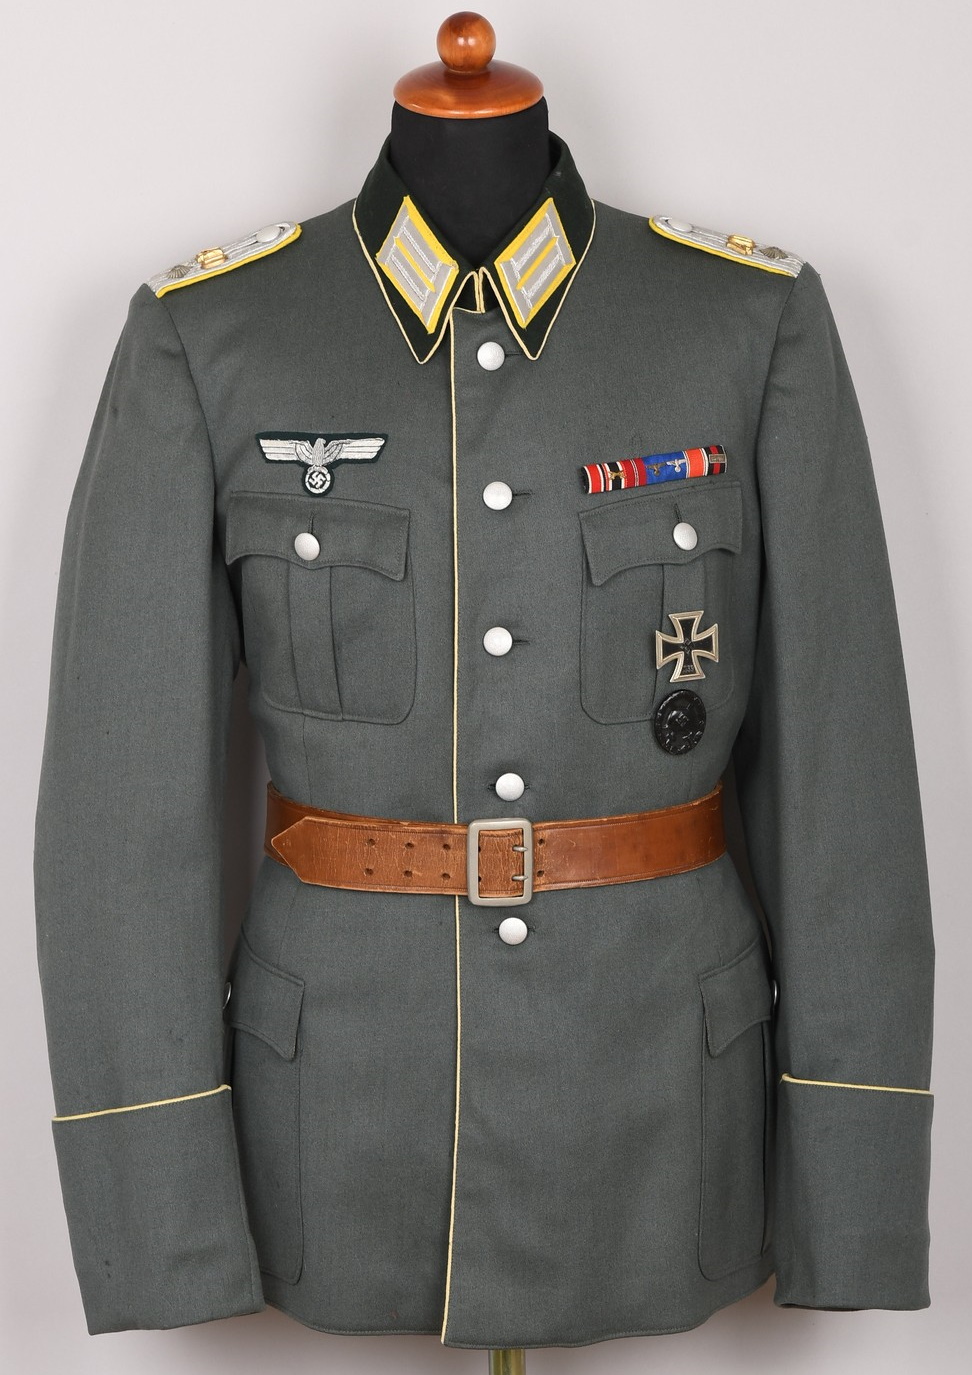 Heer Signals Rgt 40 Oberleutnants´s Piped Service Tunic